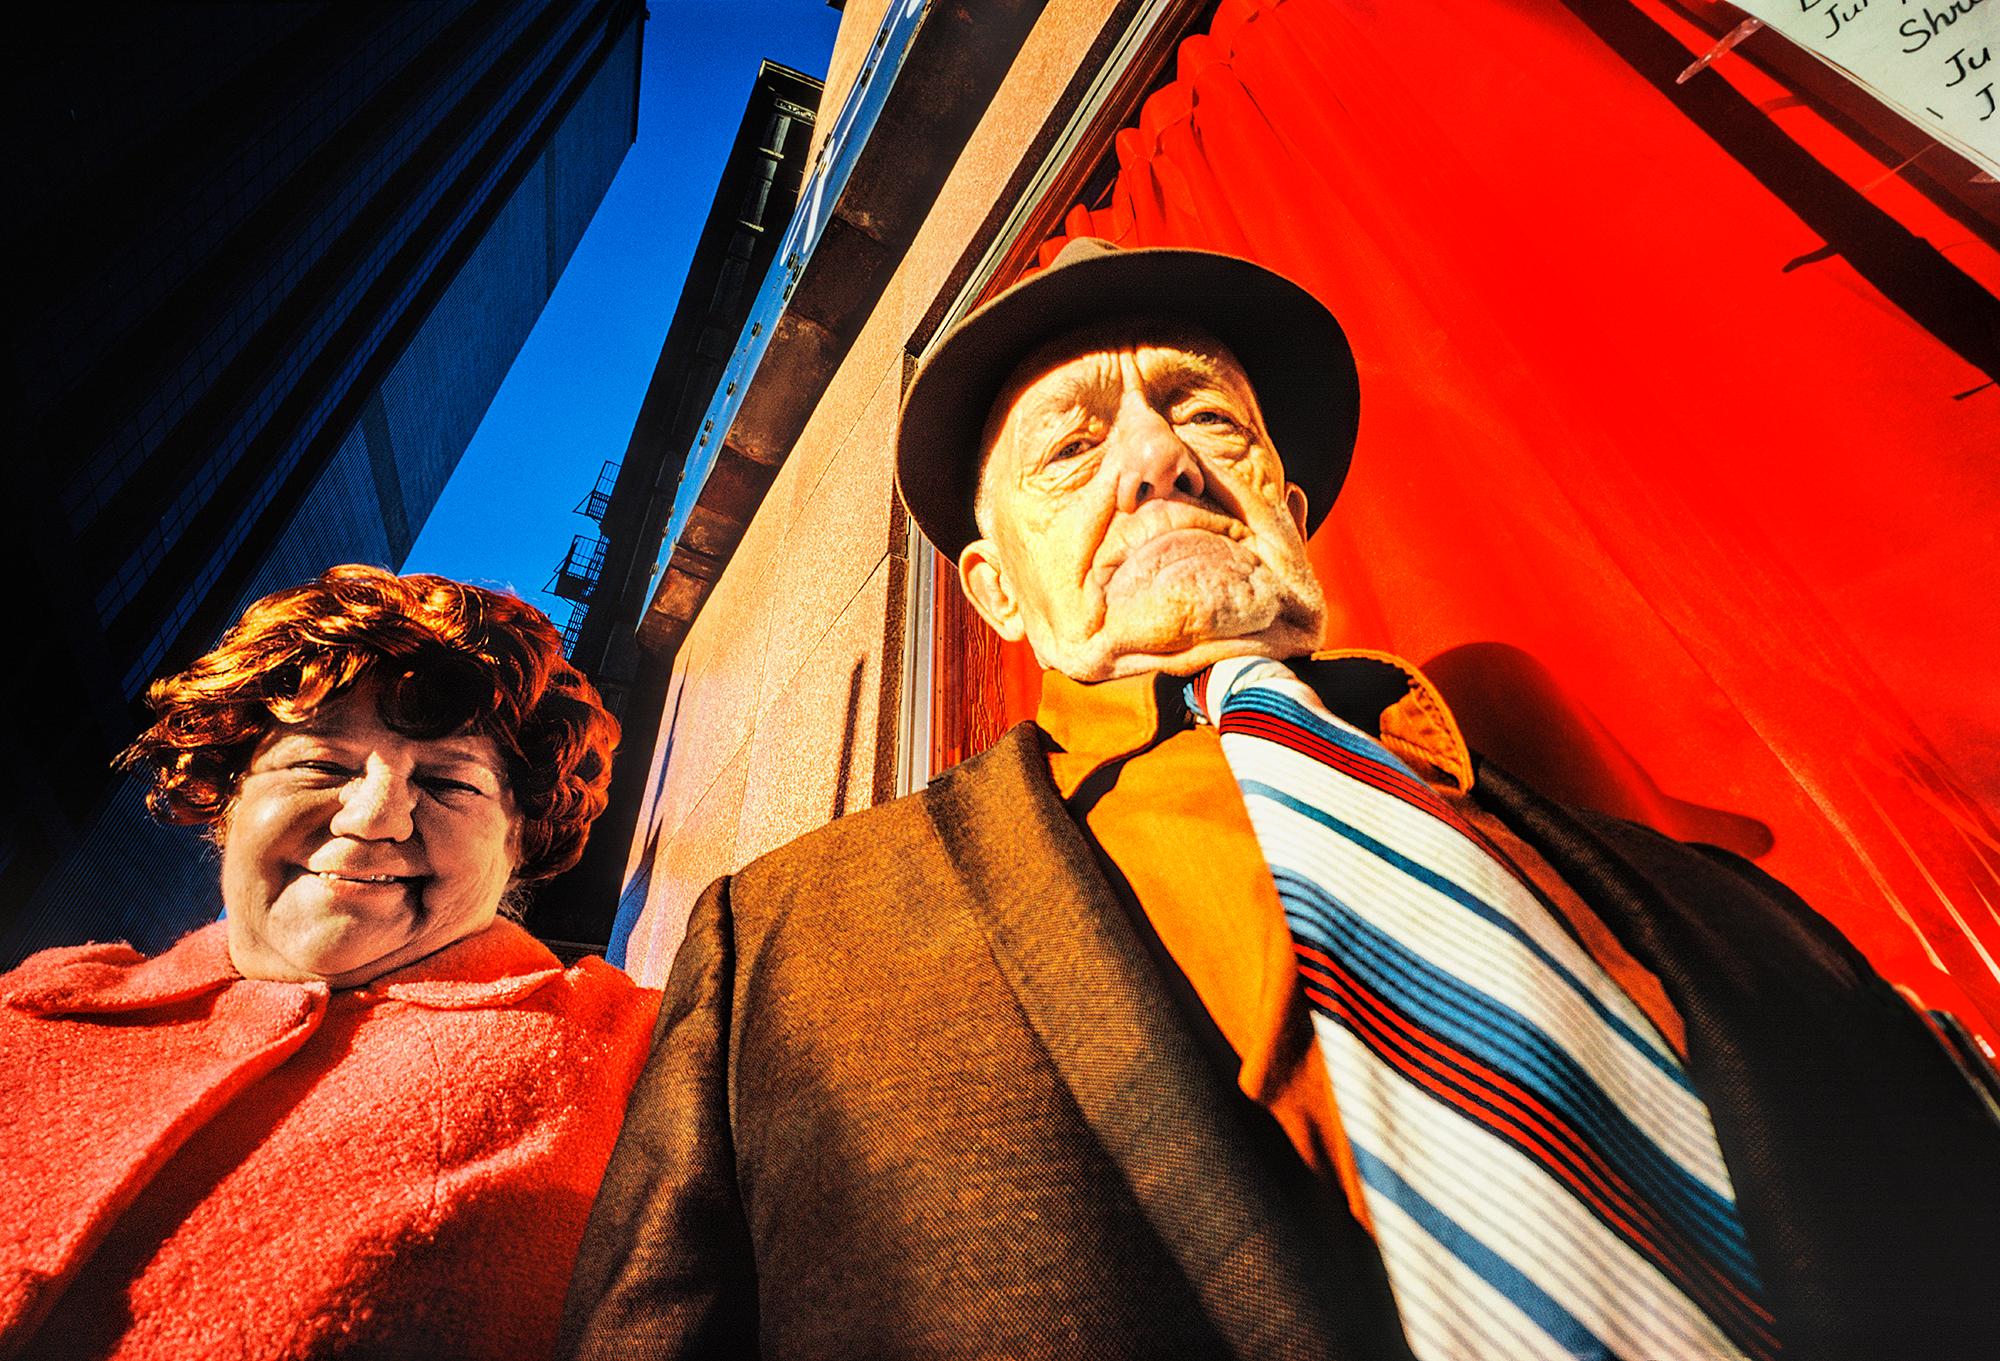 Mitchell Funk Color Photograph - Elderly Husband and Wife Group Street Portrait Against a Manhattan Red Wall